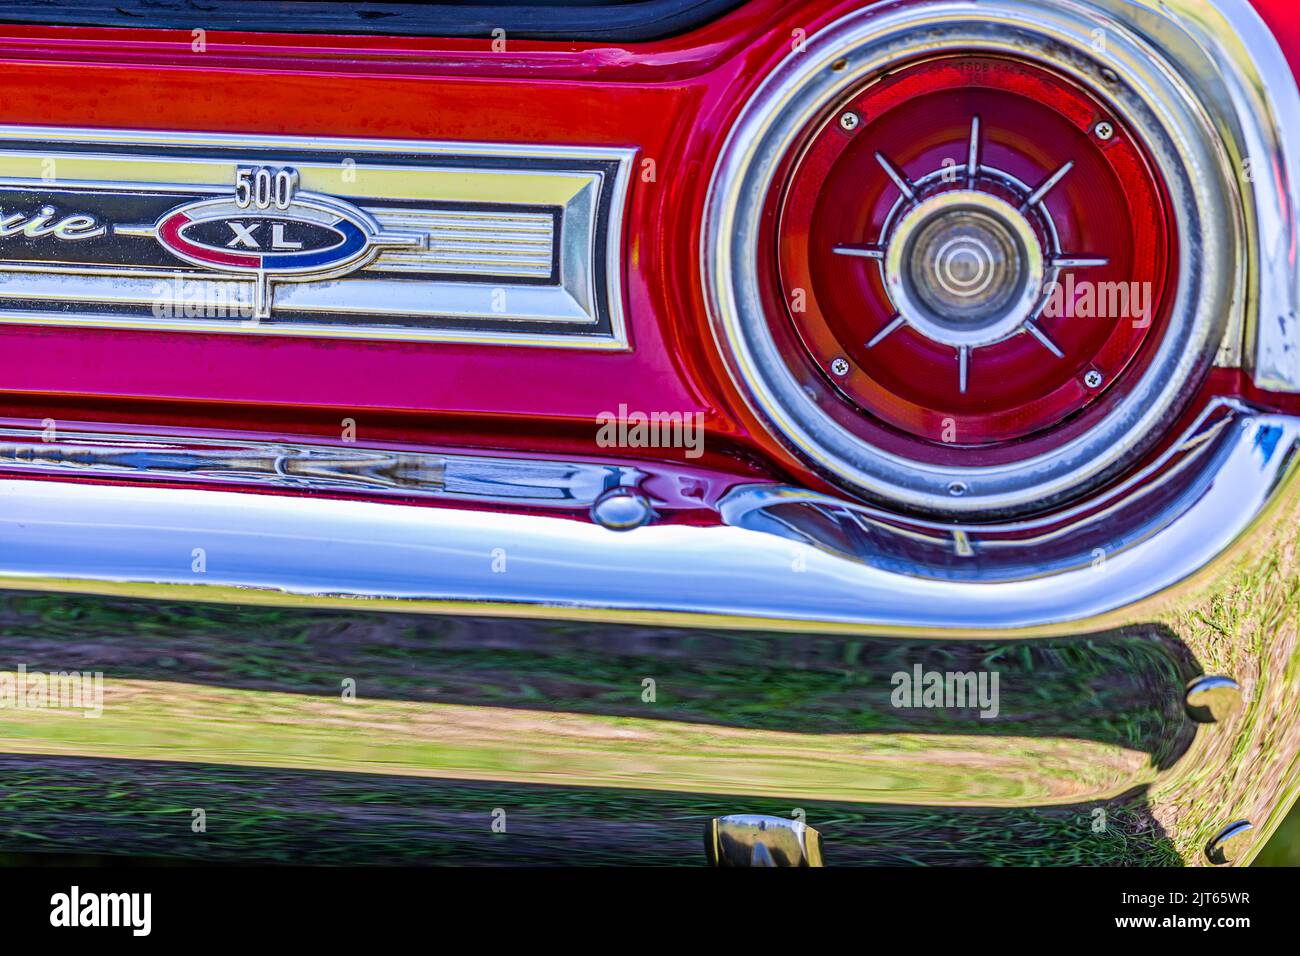 Statesboro, GA - May 17, 2014: Shallow depth of field closeup of the taillight assembly details on a 1964 Ford Galxie 500 XL convertible. Stock Photo